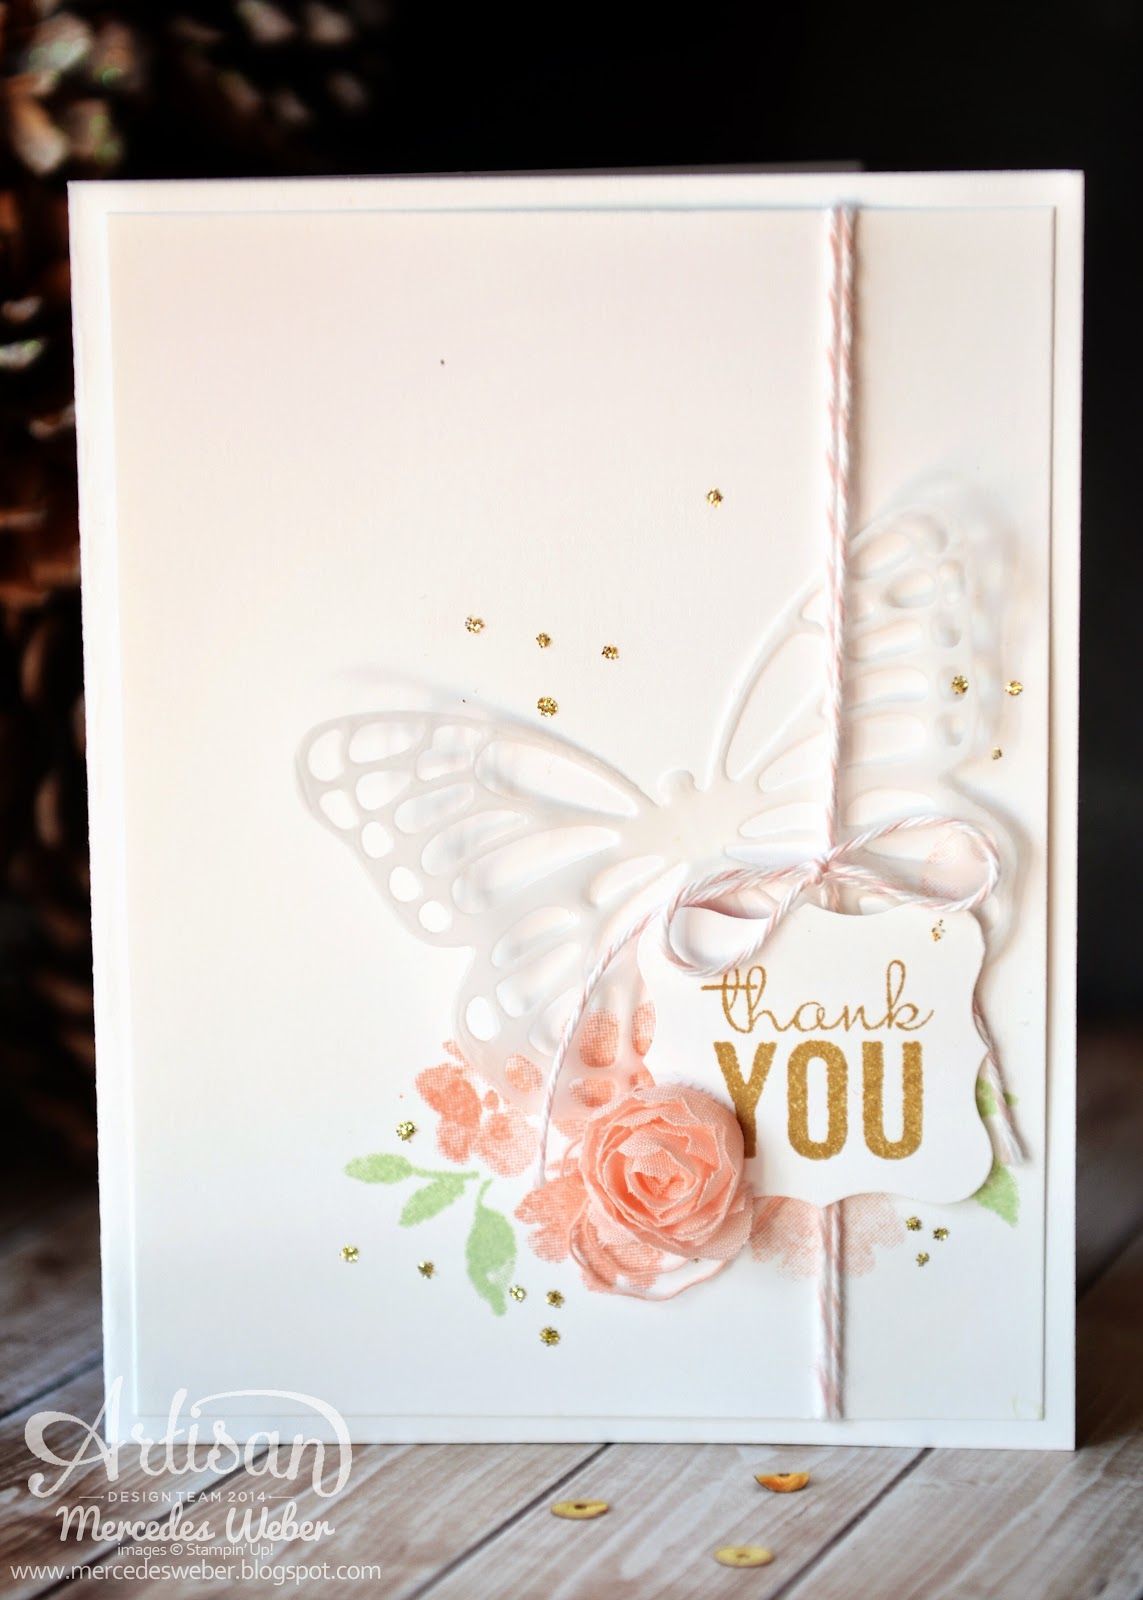 Wednesday, January 14 Creations by Mercedes: Stampin Up Artisan Blog Hop Painted Petals, Butterflies Thinlits Dies